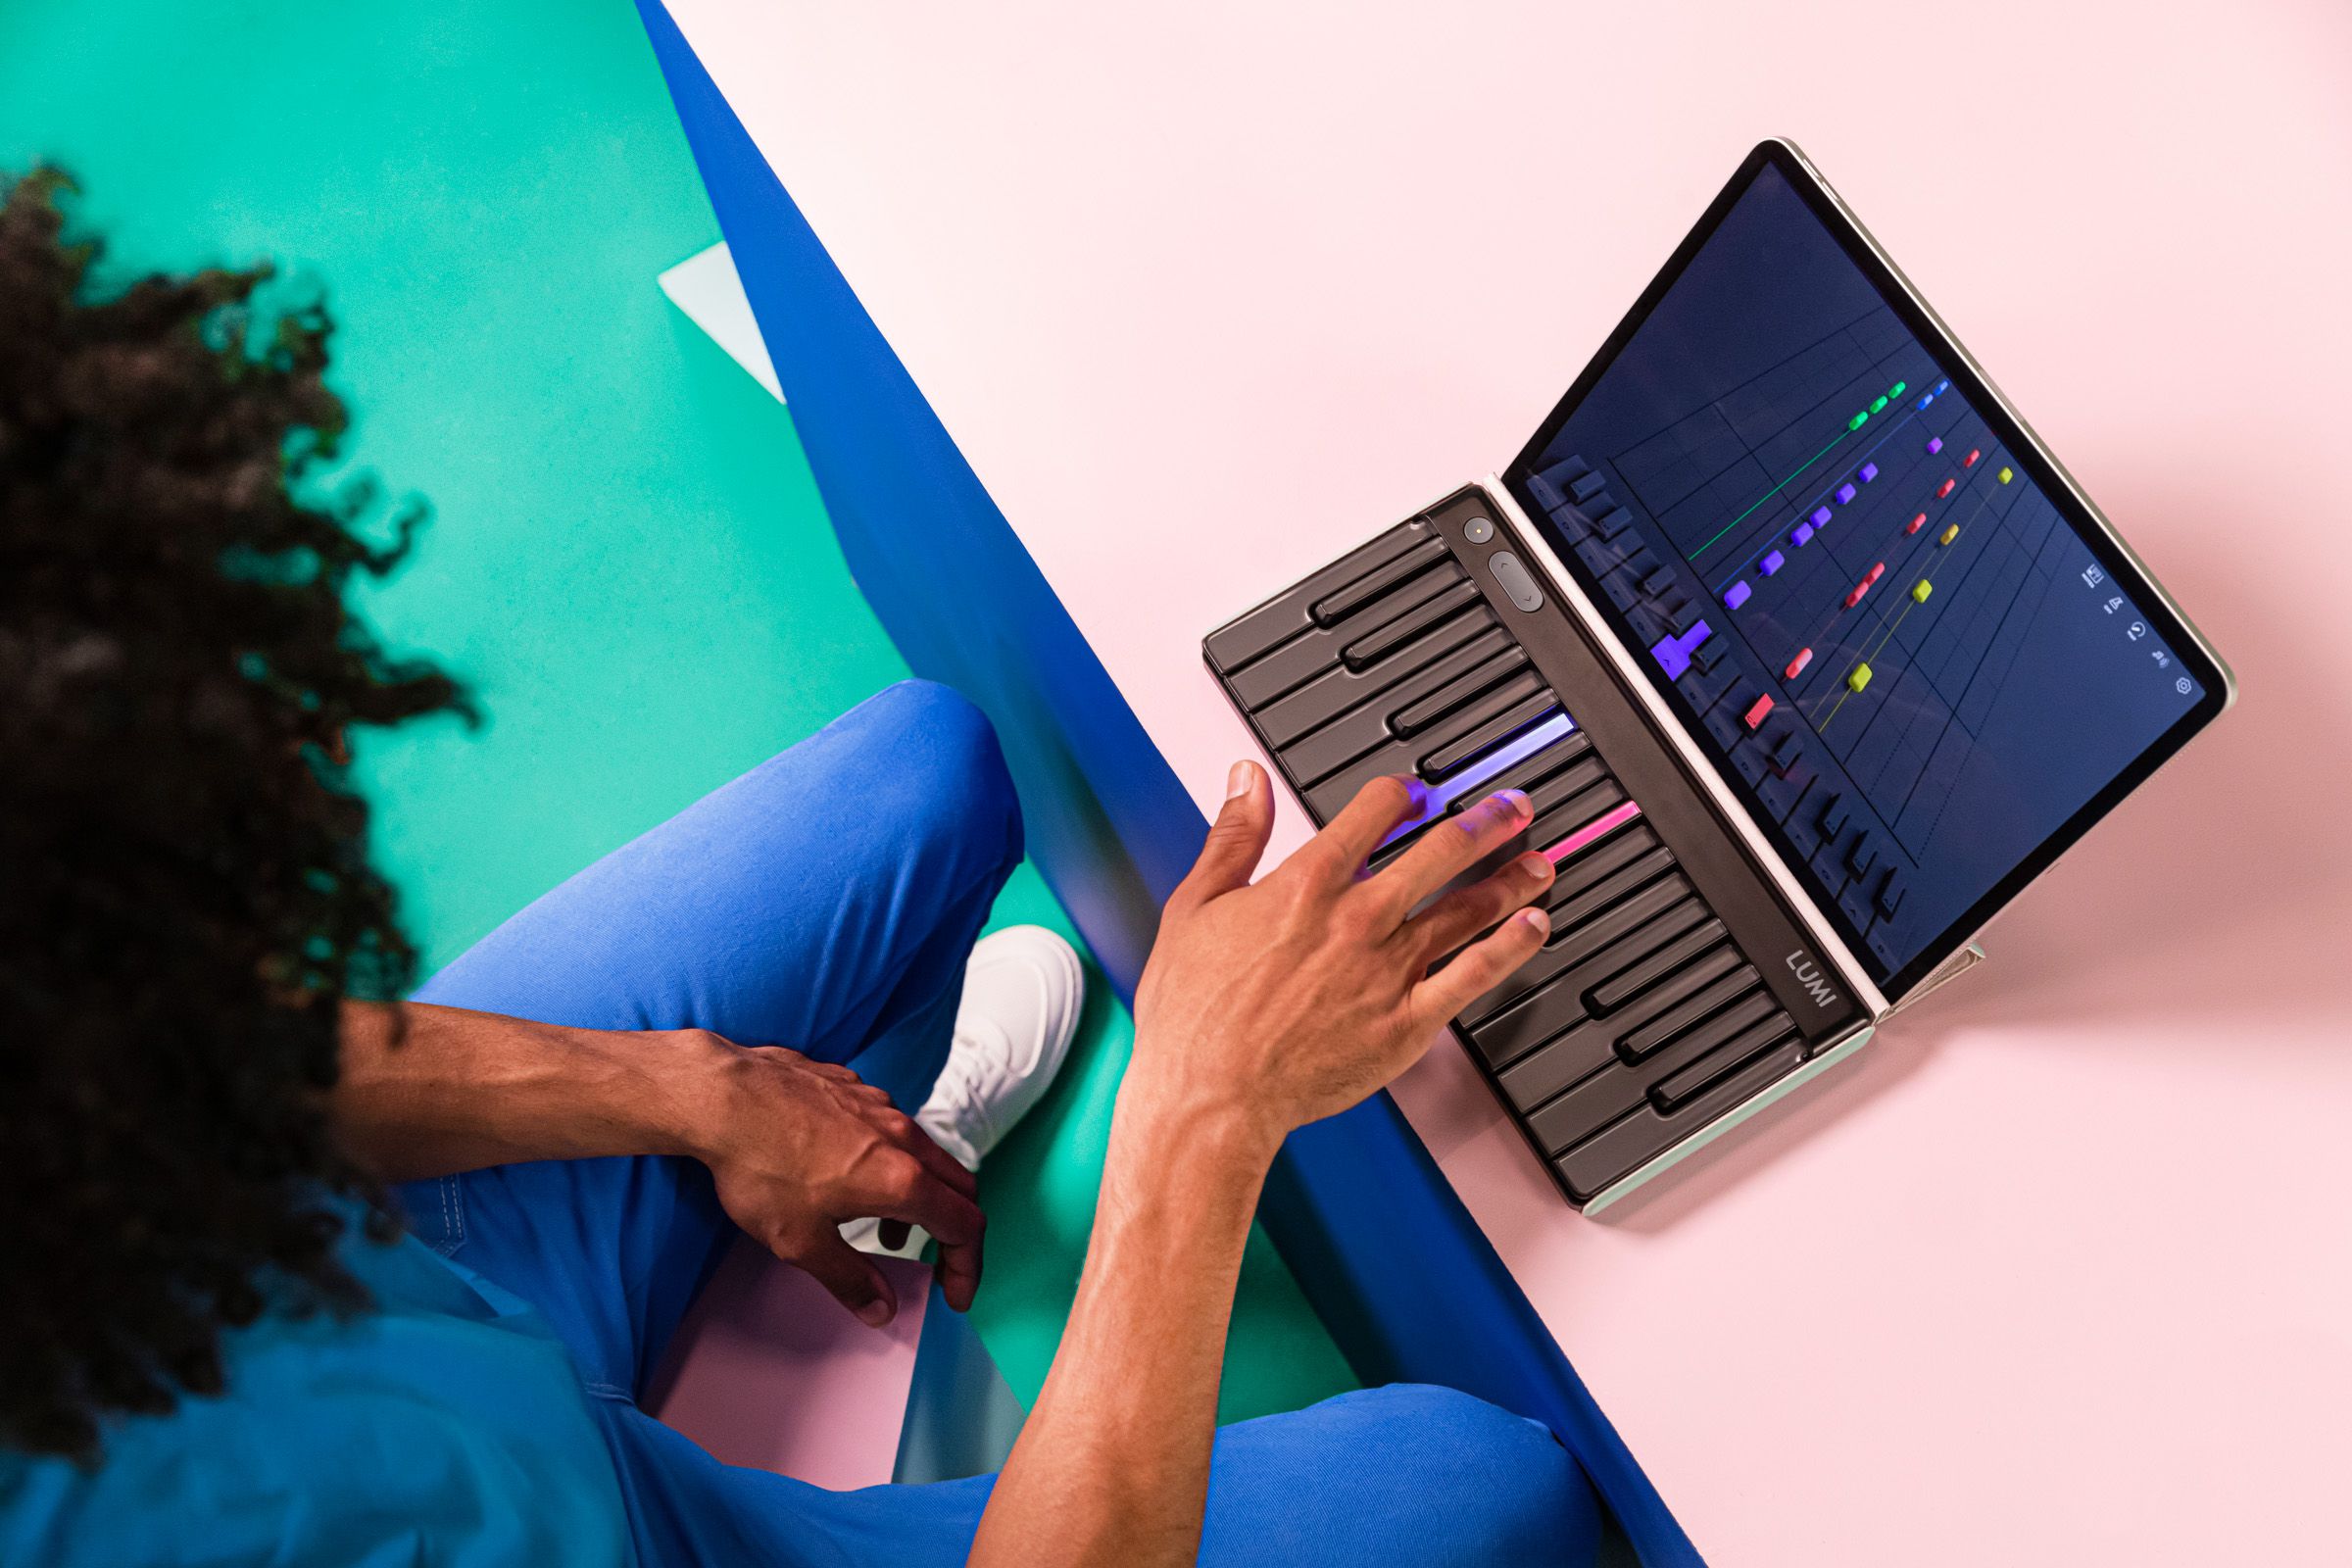 The key draw for the Lumi is its Guitar Hero-style interface that teaches you how to play. 